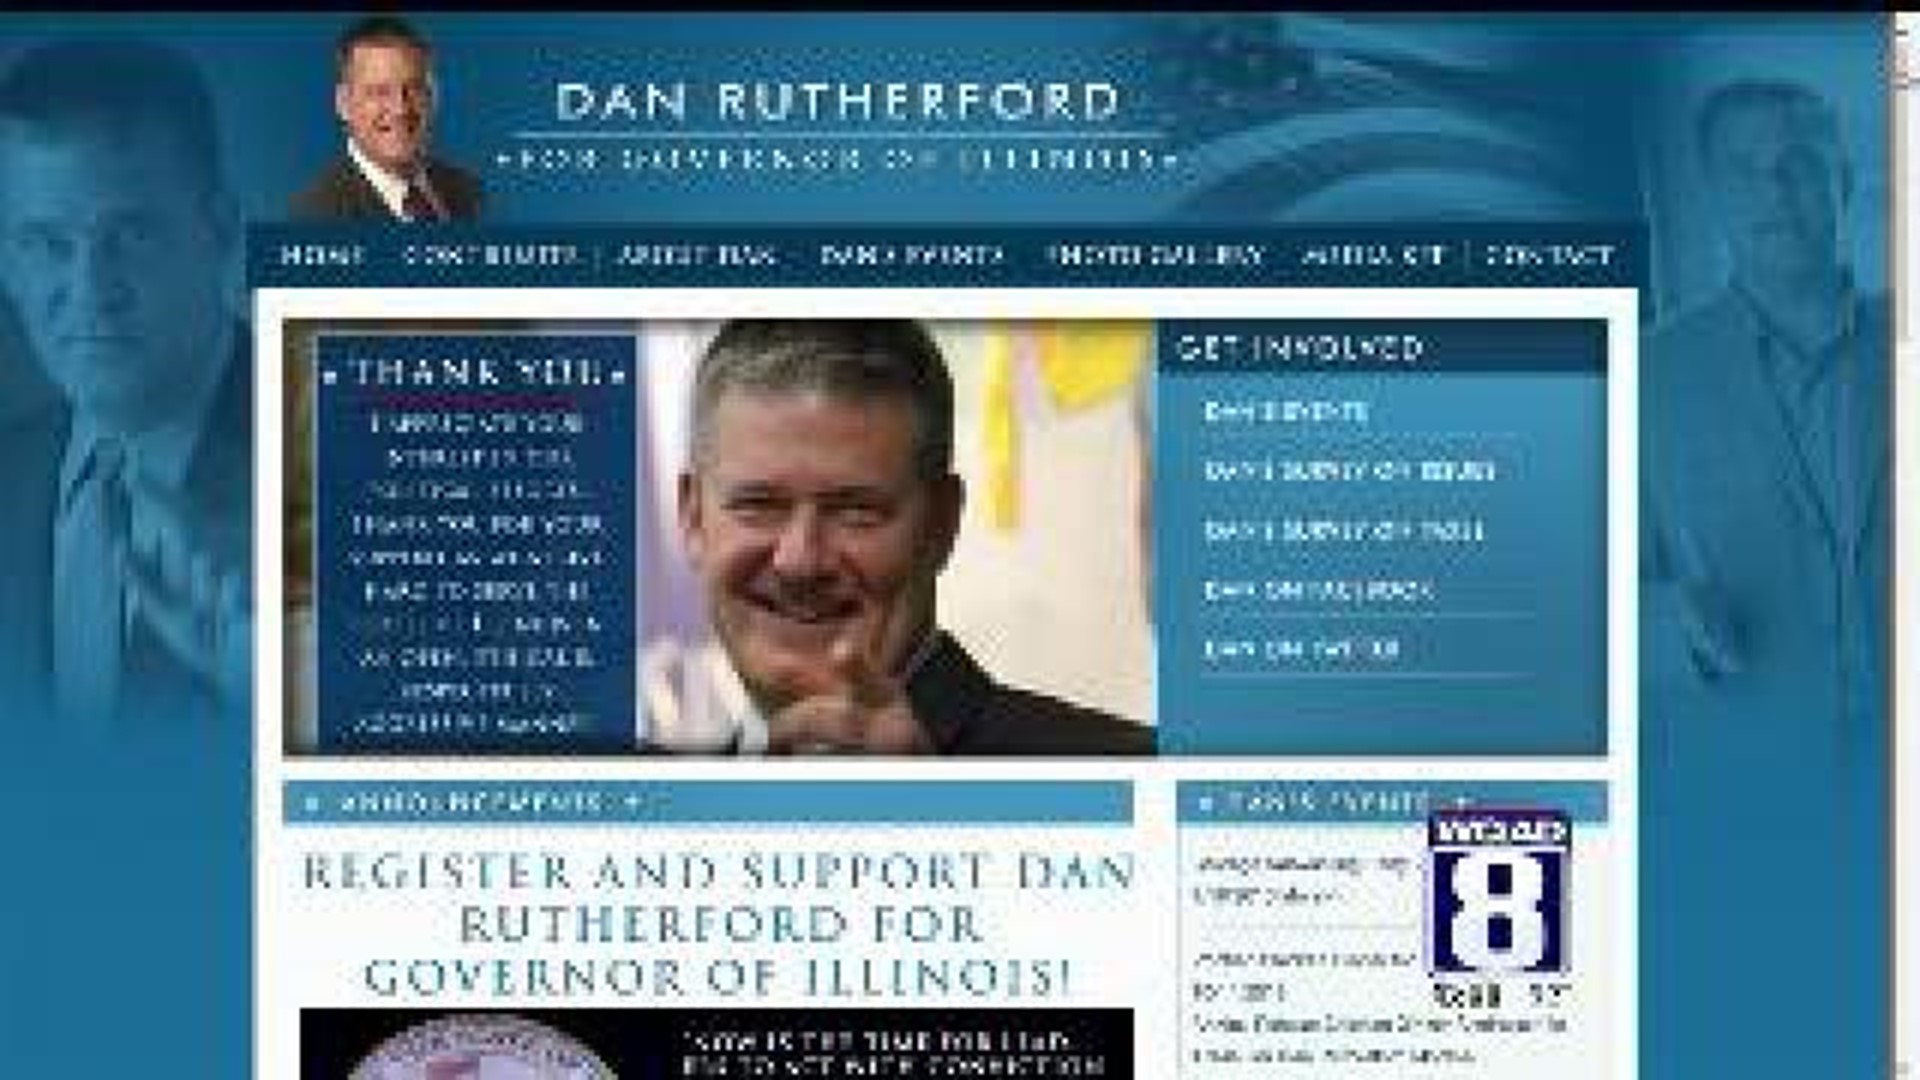 Rutherford announces plans to run for Illinois Governor in 2014